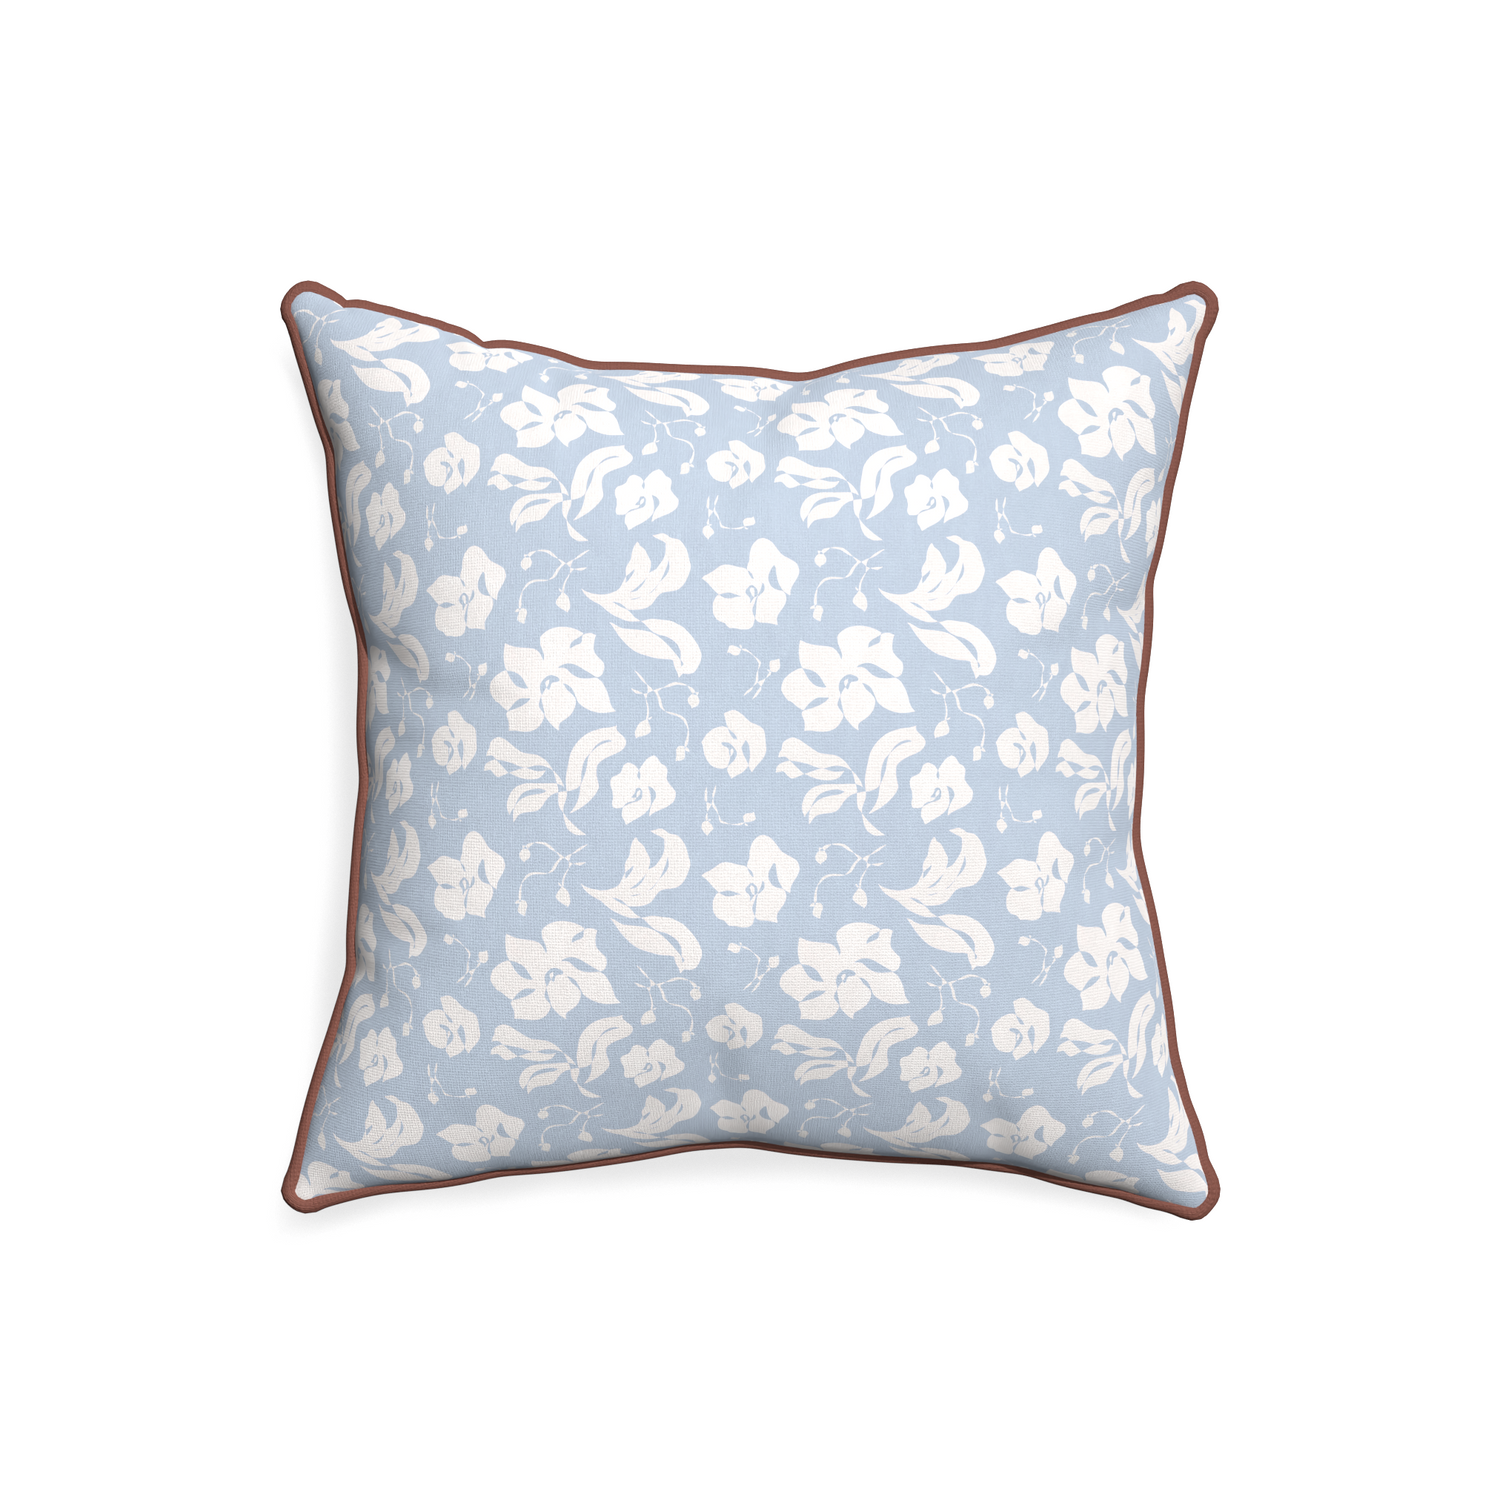 20-square georgia custom cornflower blue floralpillow with w piping on white background